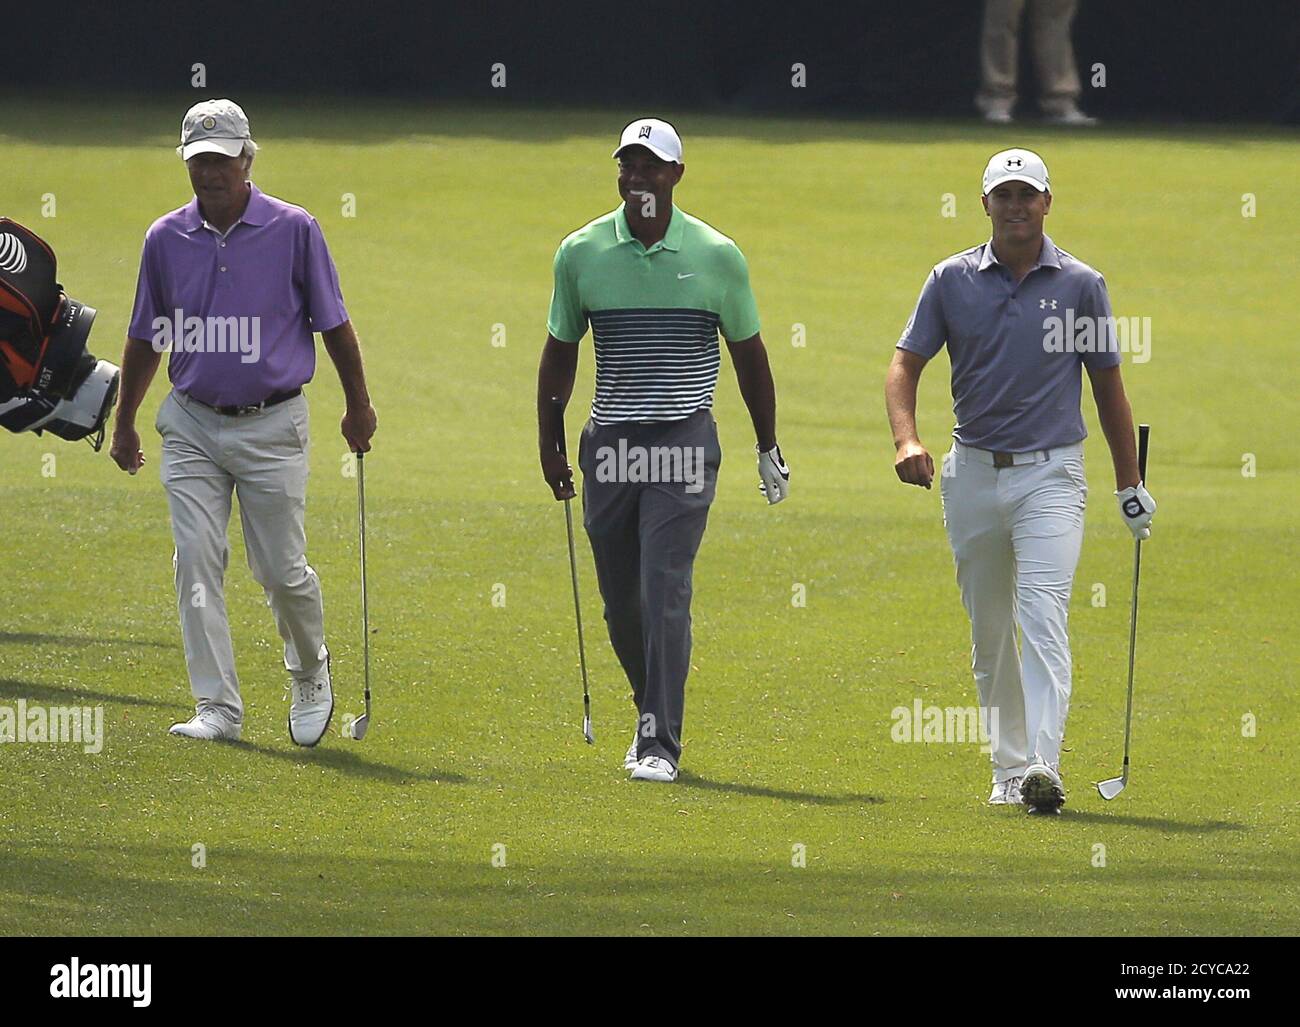 Jordan Spieth (R) walks to the 16th green with Tiger Woods (C) and Ben Crenshaw during a practice round ahead of the 2015 Masters at Augusta National Golf Course in Augusta, Georgia April 8, 2015. Spieth's sublime putting on some of the most treacherous greens in golf, which set up his Masters victory on Sunday, was underpinned by his imaginative touch, says putting maestro Ben Crenshaw. Picture taken April 8, 2015.   REUTERS/Brian Snyder Stock Photo